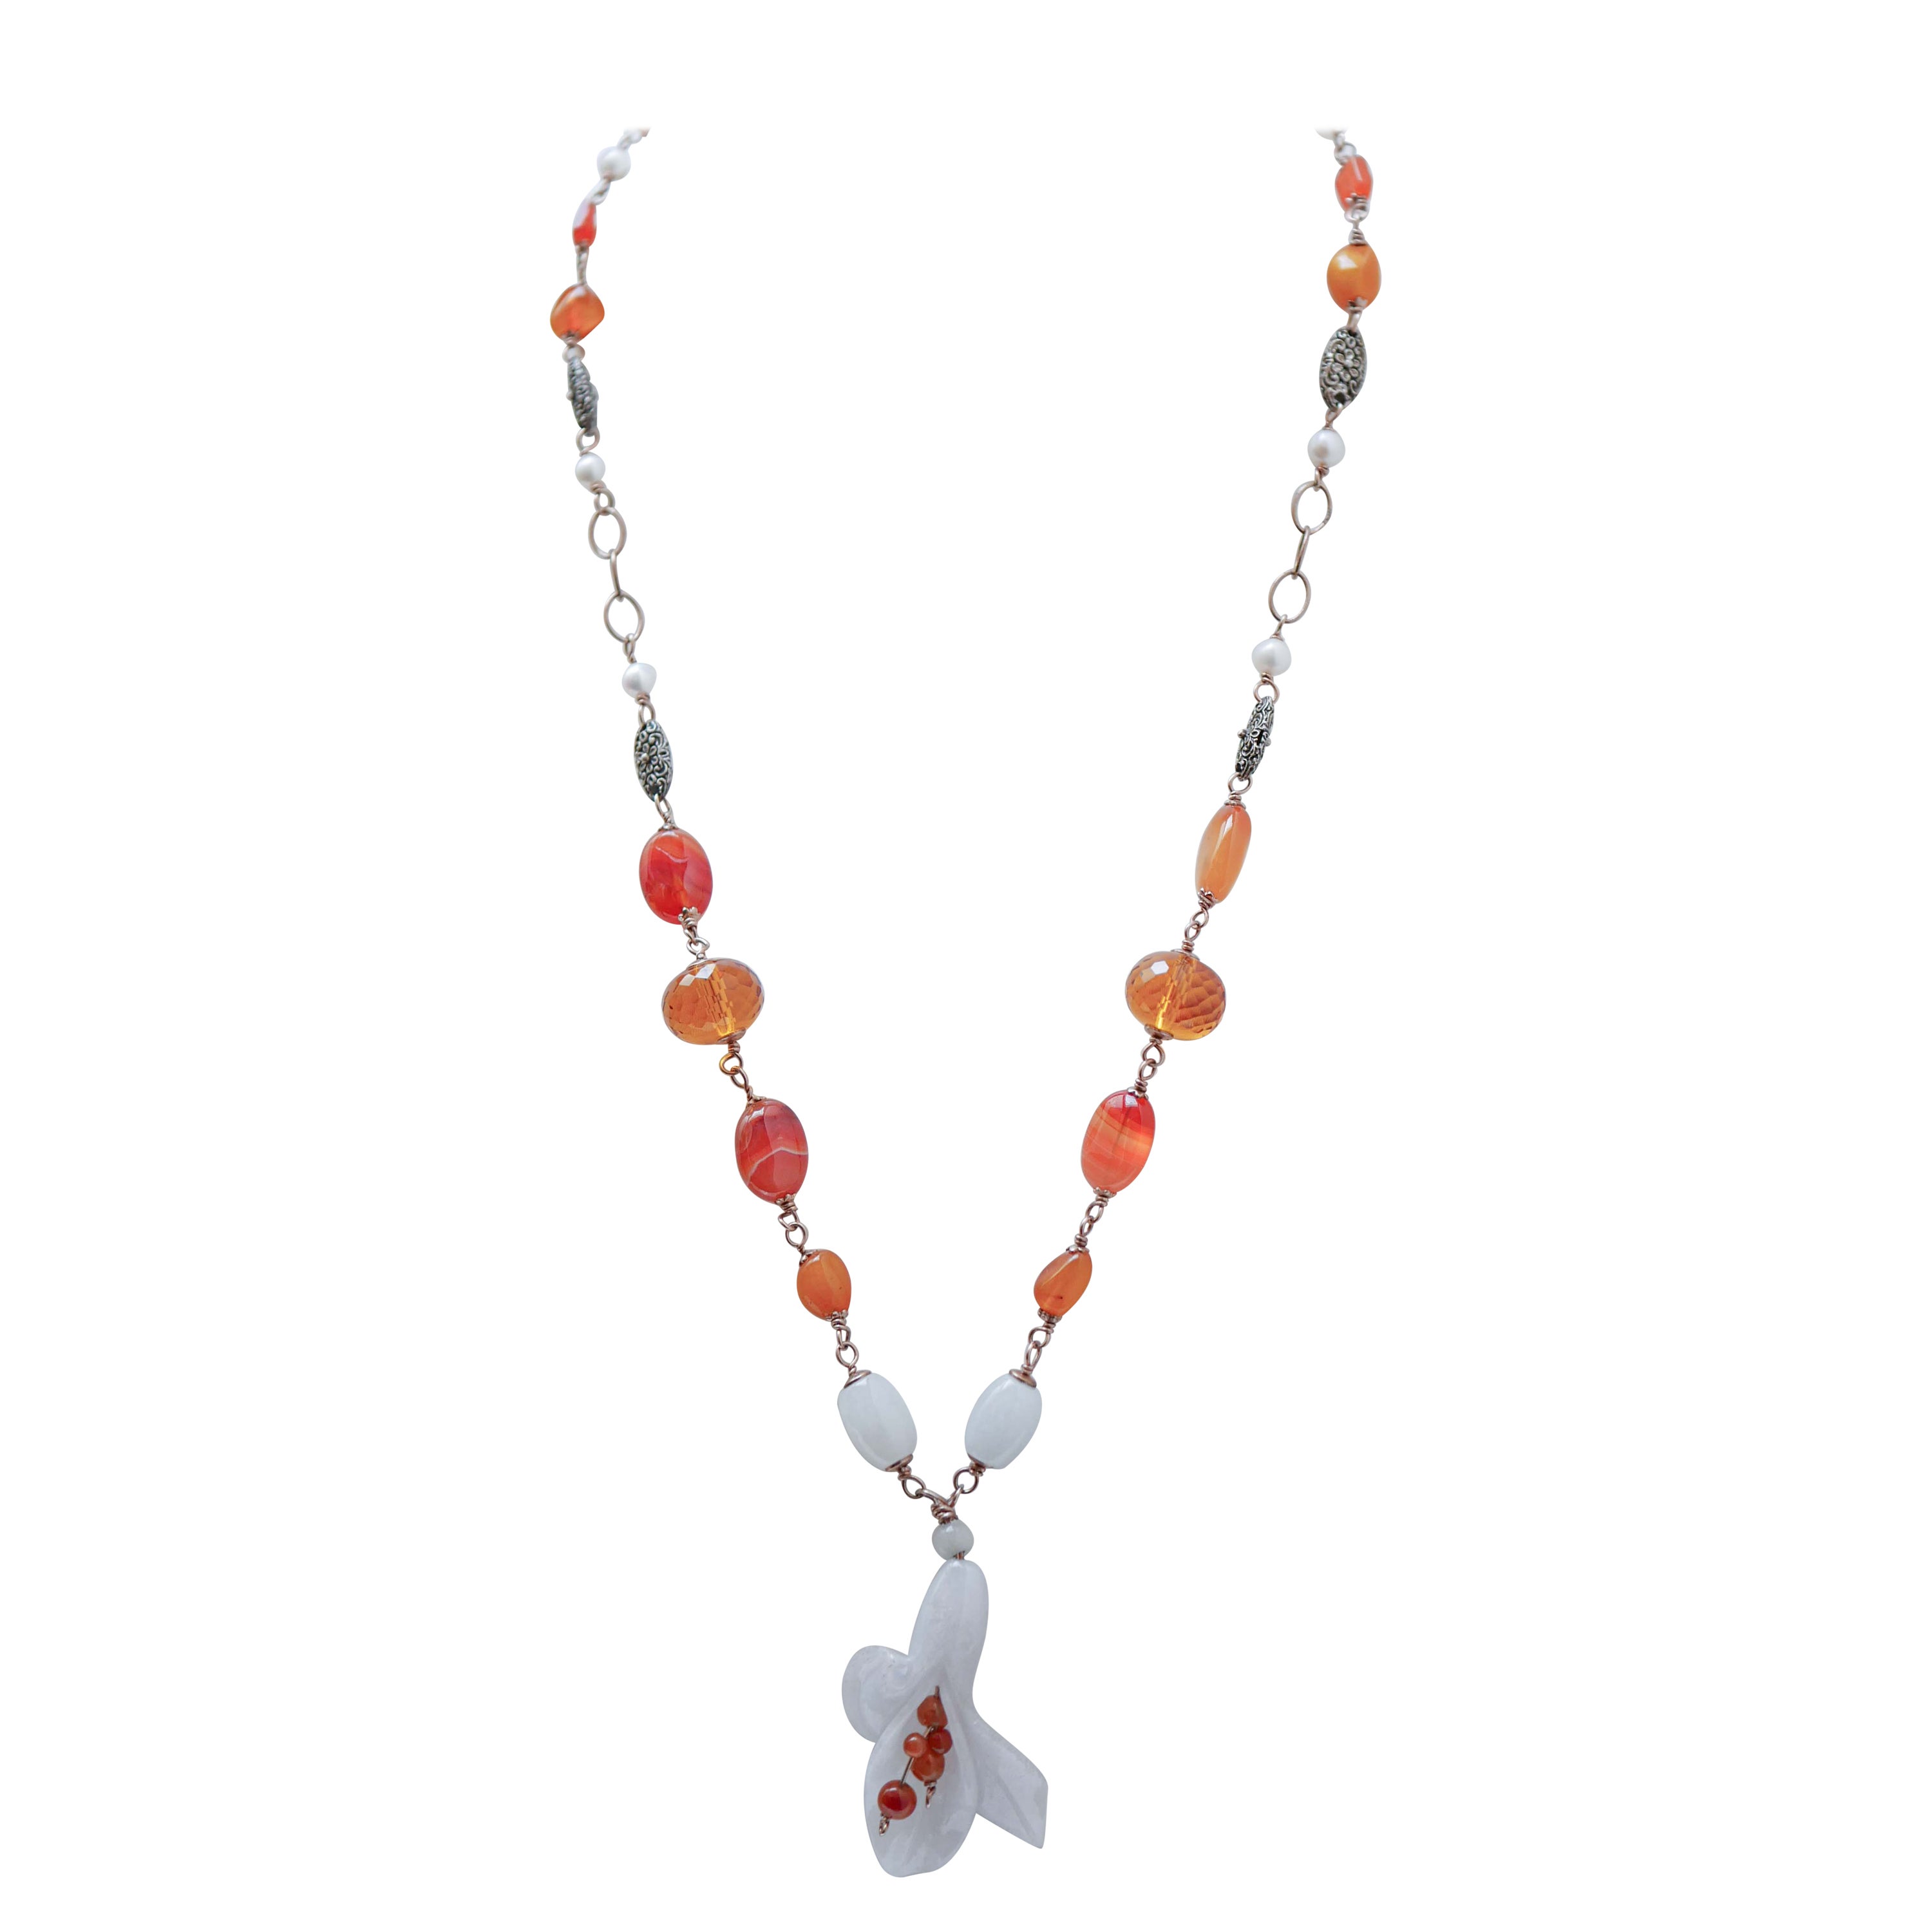 Agate, Carnelian, Hydrothermal Topazs, Amber, Pearls,  Gold and Silver Necklace.